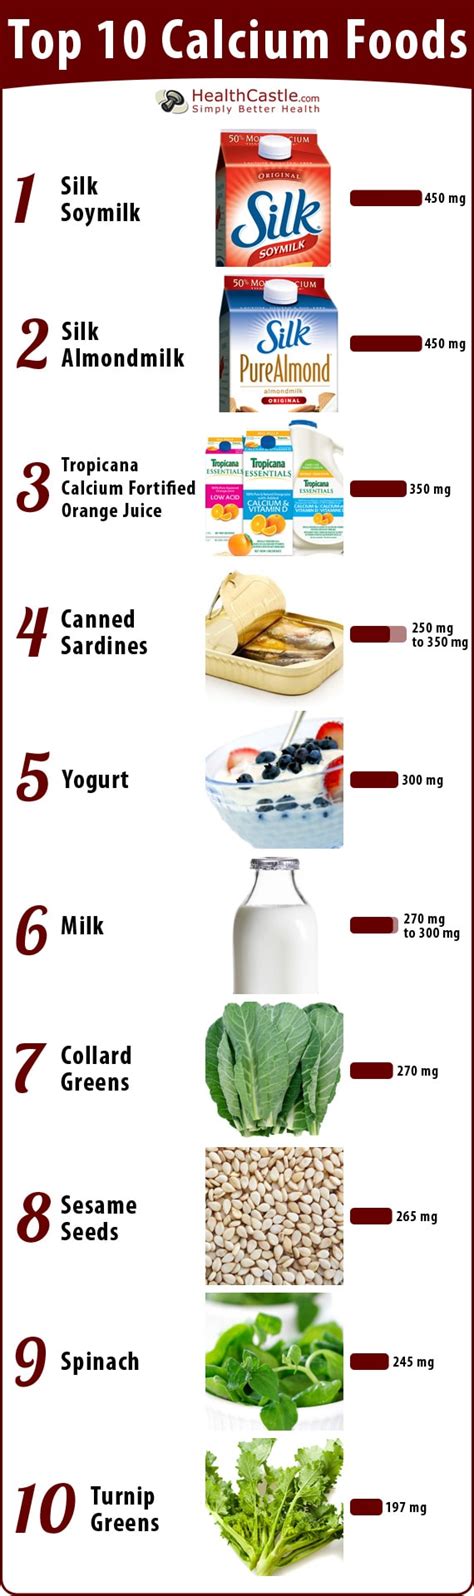 Milk, cheese and other dairy foods. Top 10 Calcium Rich Foods | HealthCastle.com